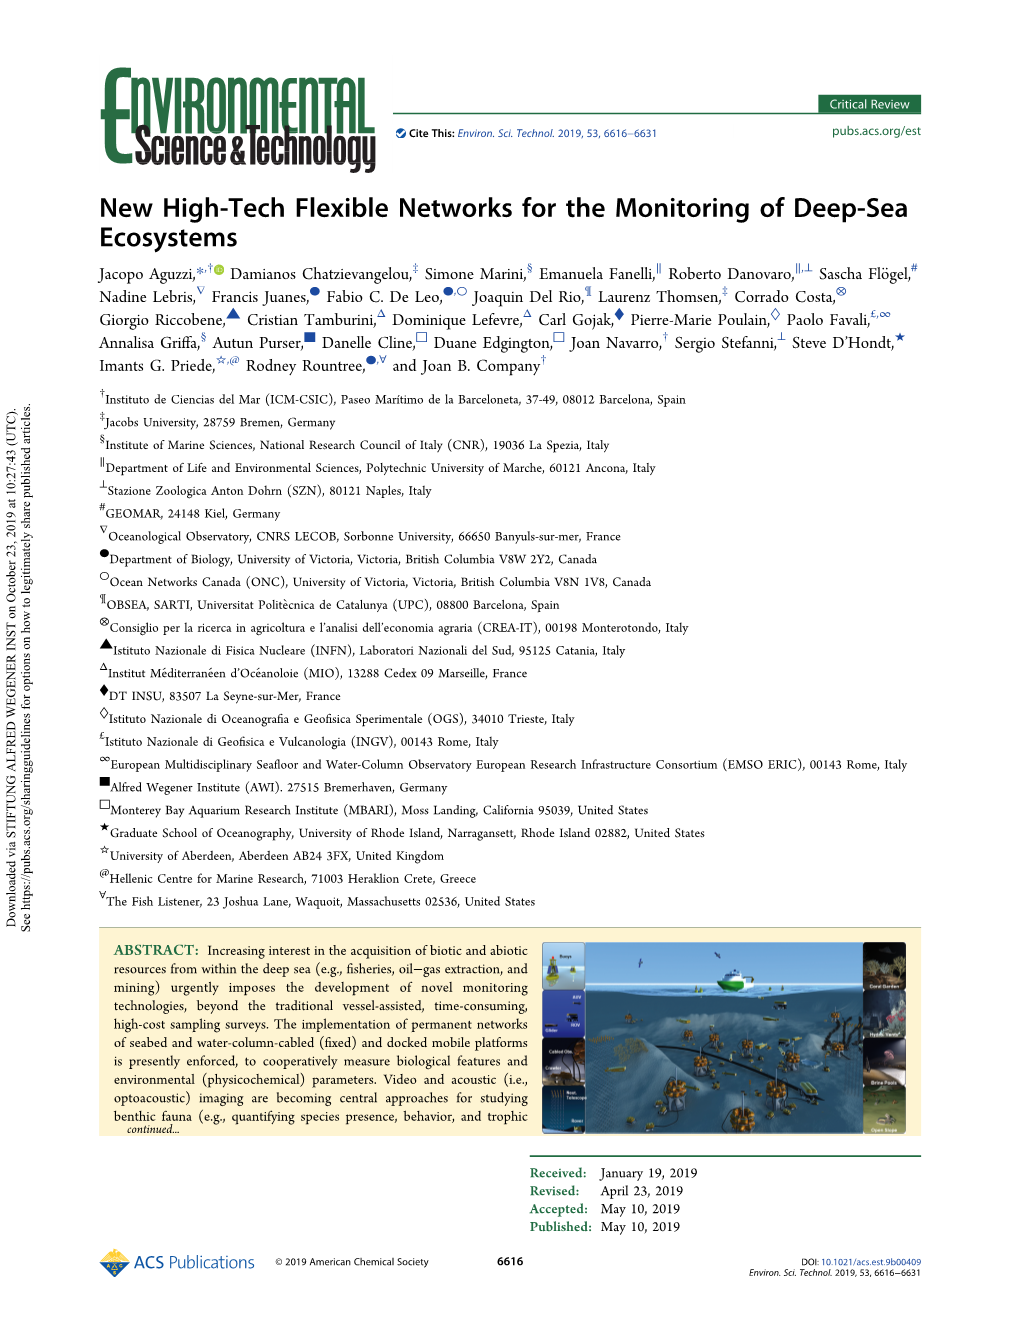 New High-Tech Flexible Networks for the Monitoring of Deep-Sea